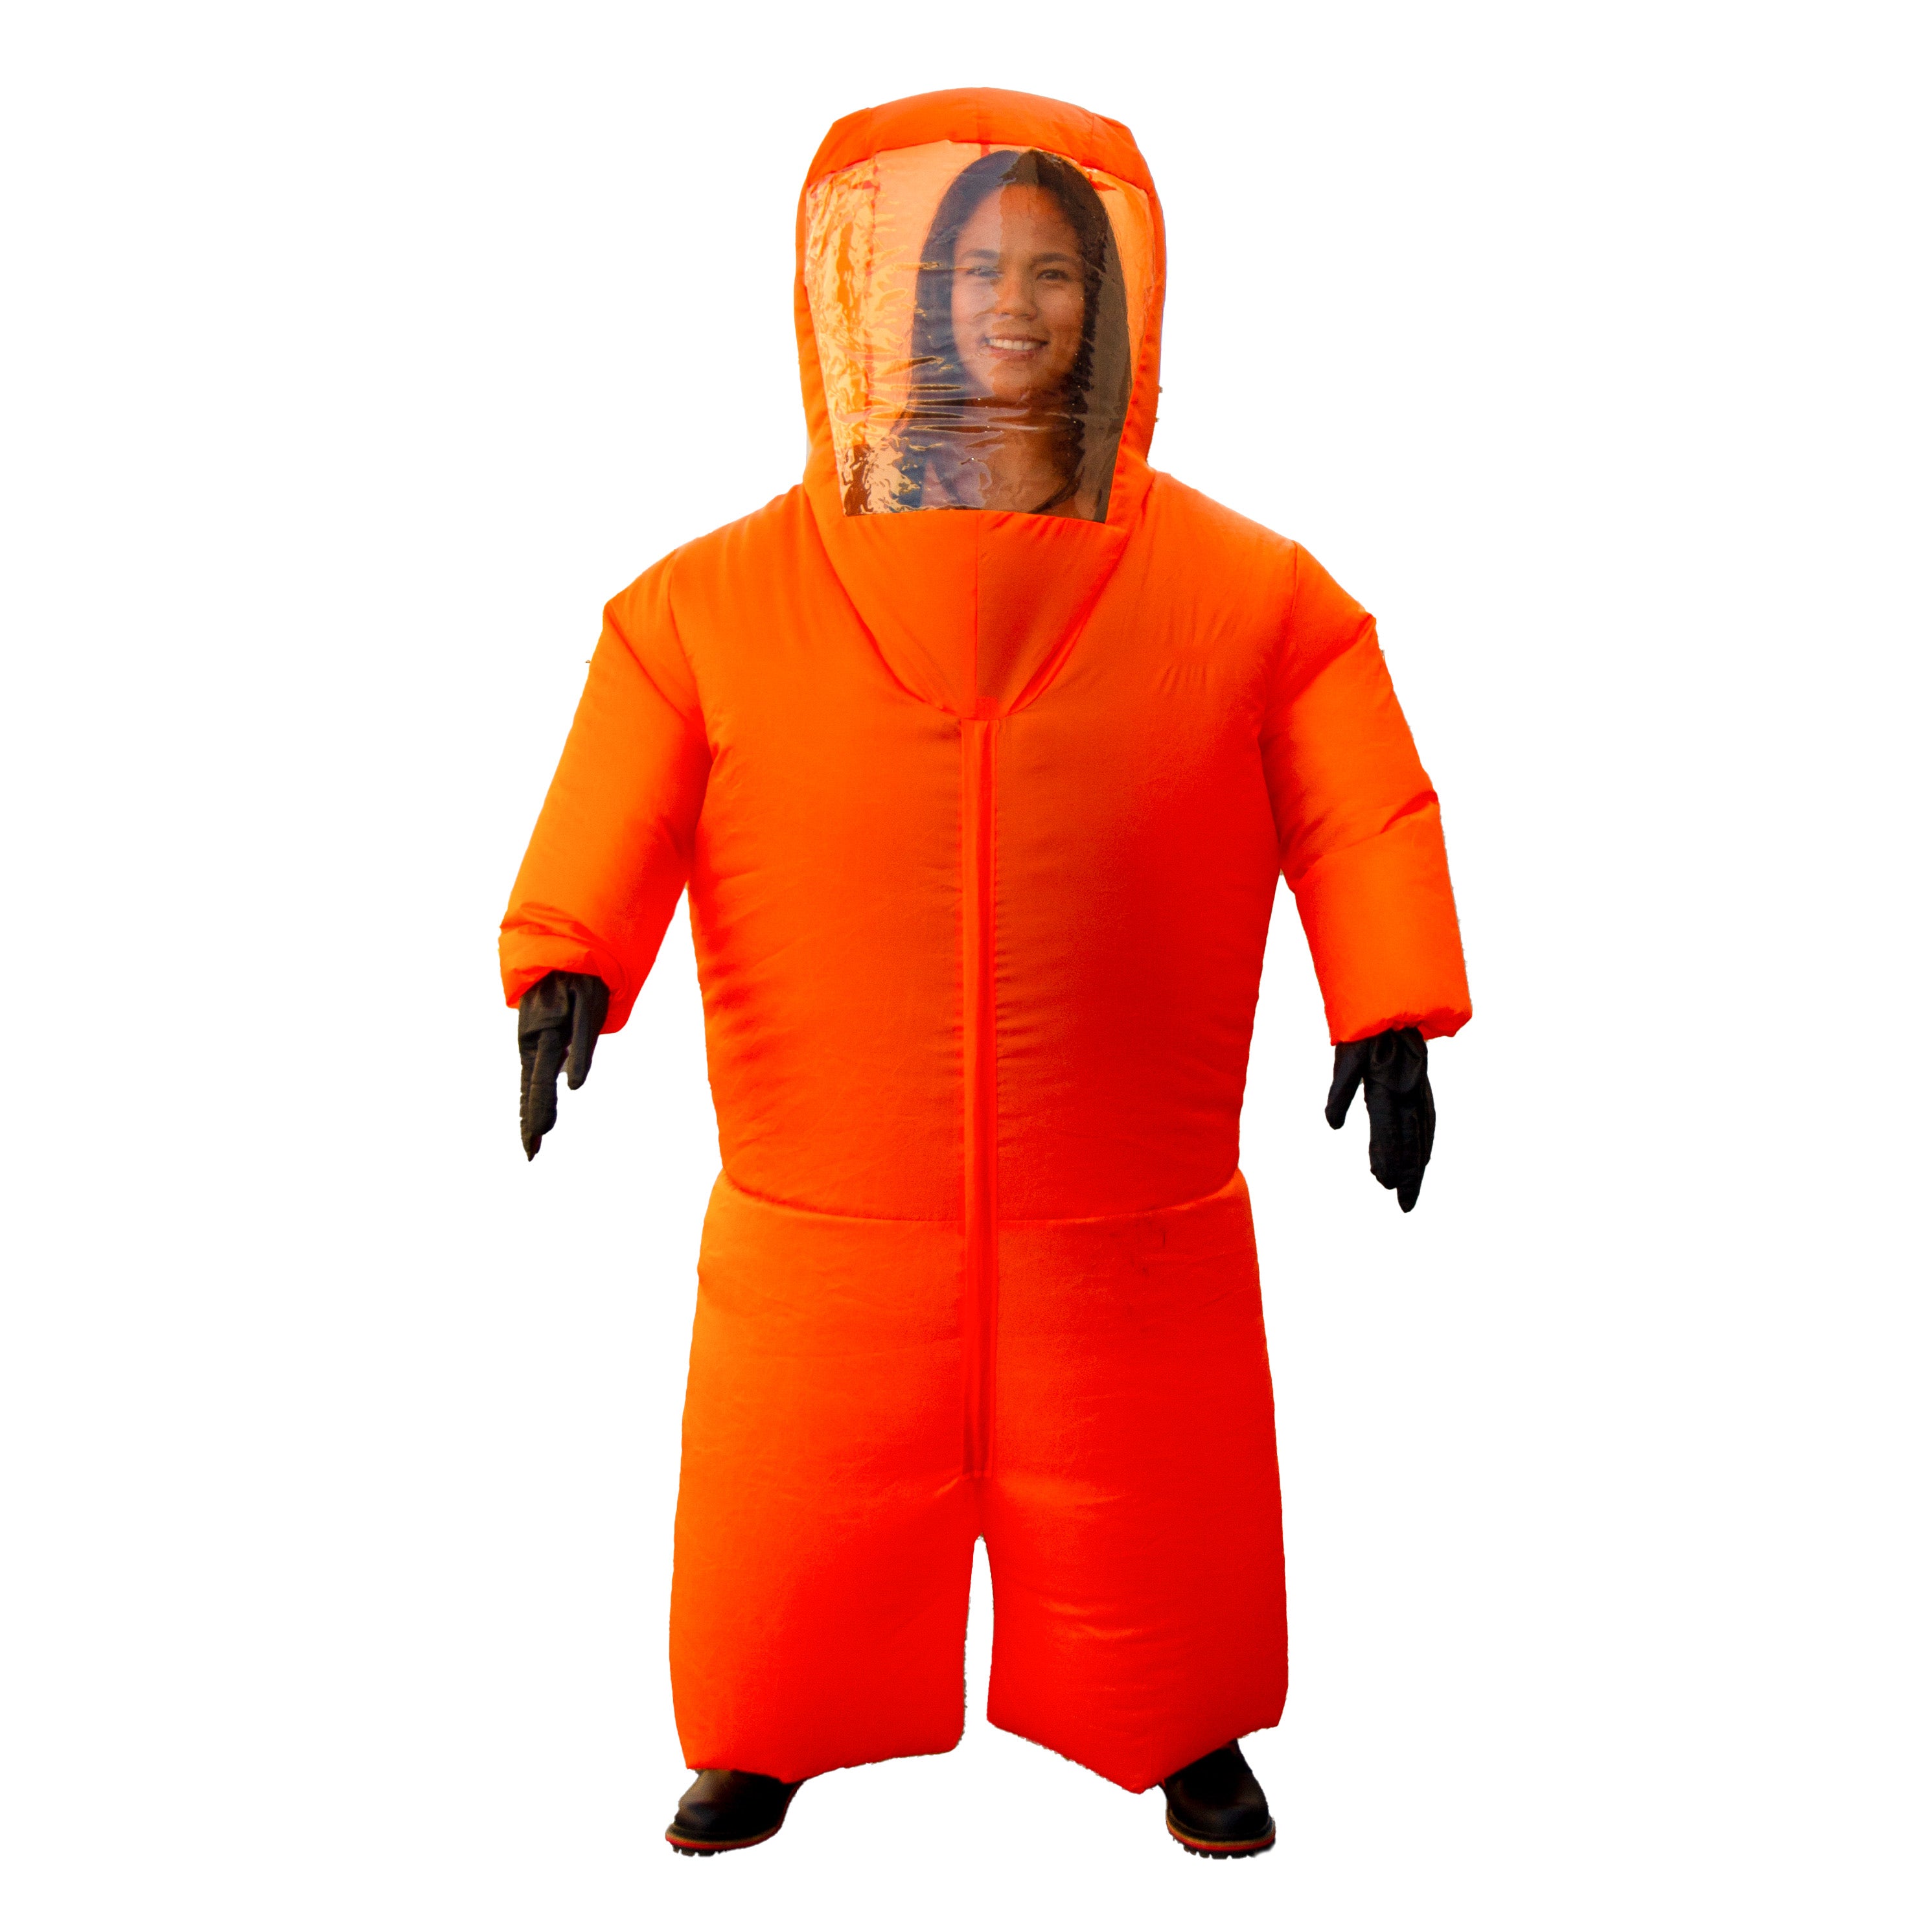 Inflatable Fashion & Apparel, Inflatable Garments, Inflatable Costumes